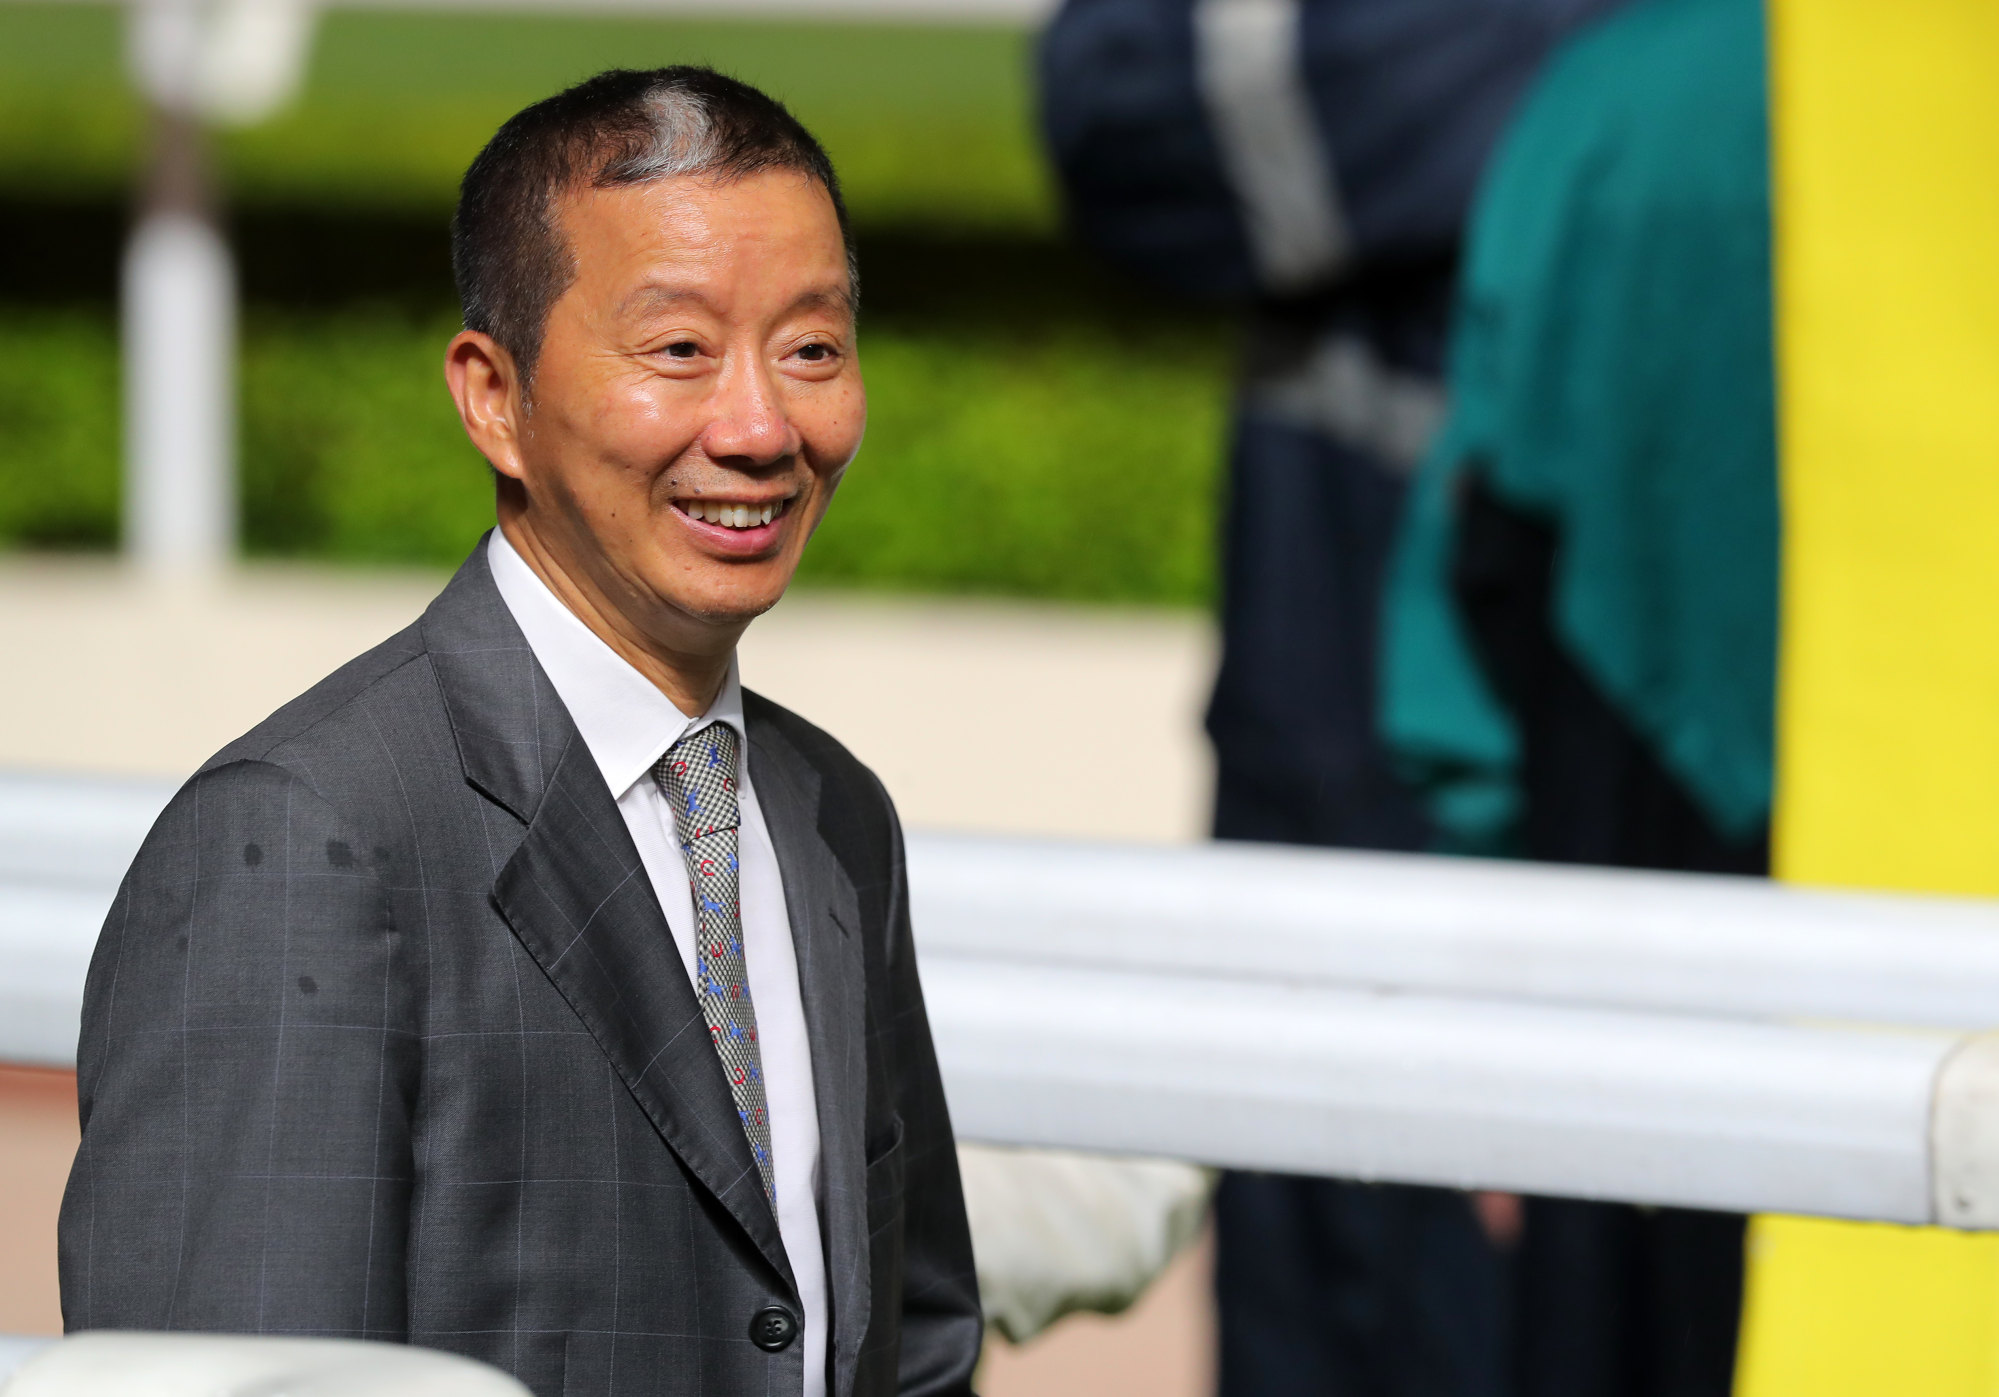 Trainer Benno Yung is approaching retirement age.